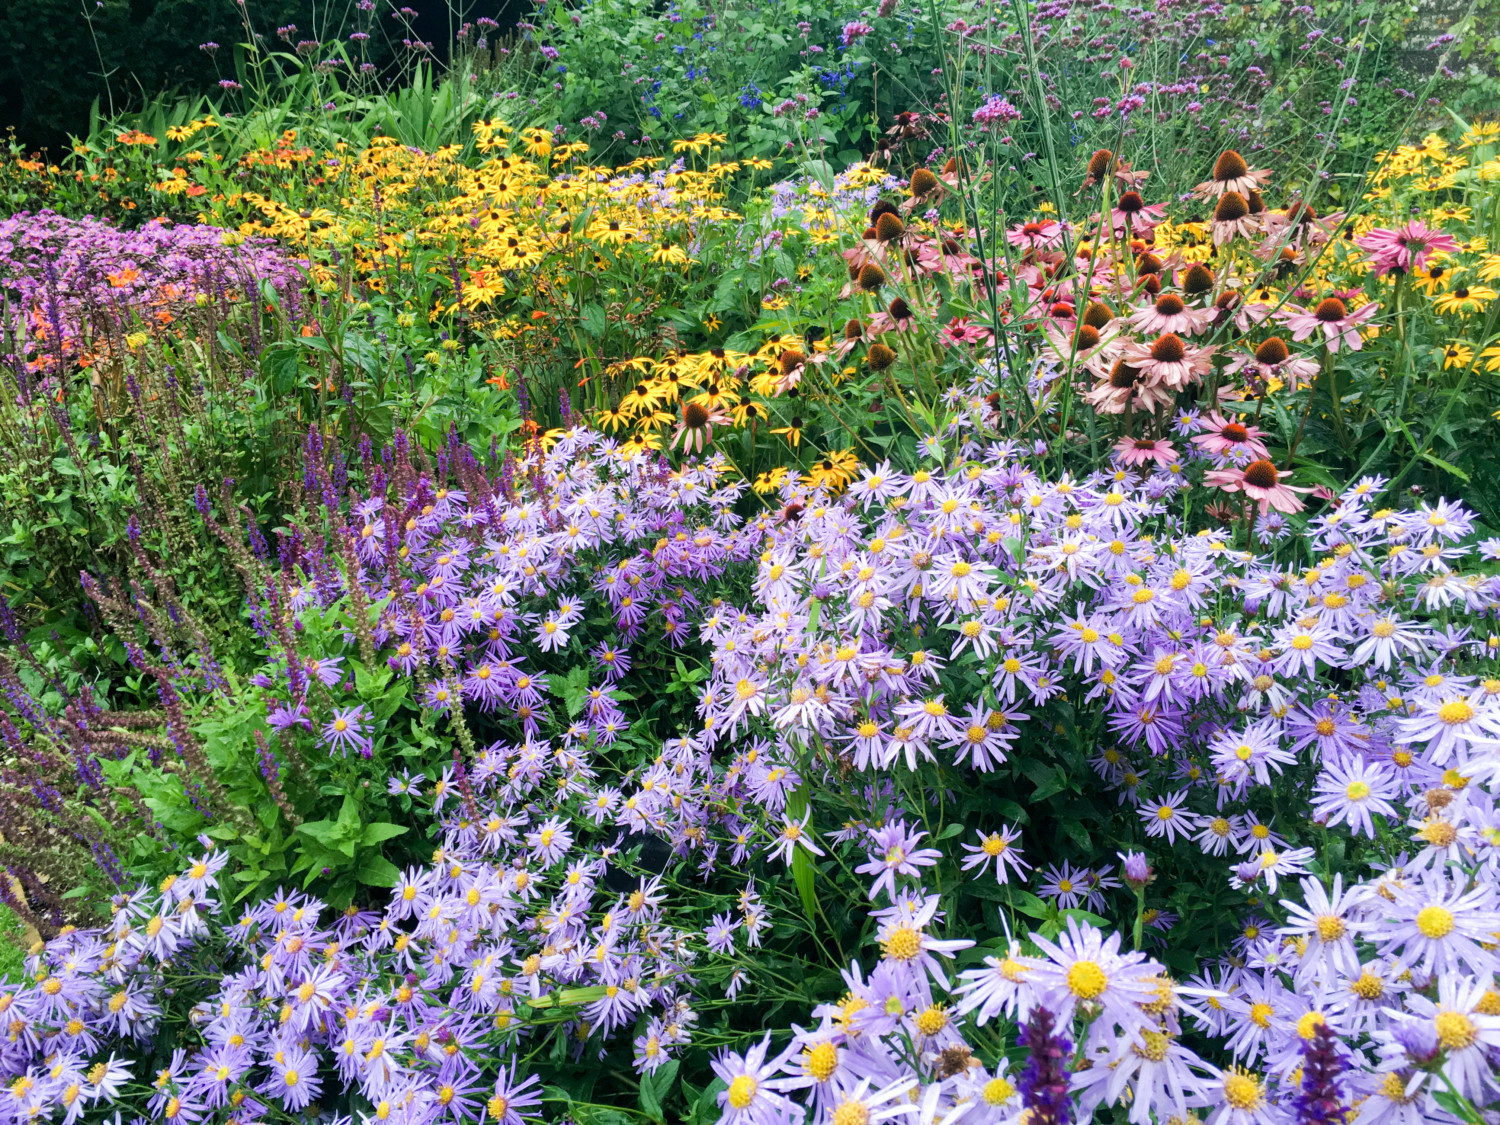 Mixed perennial border flowers in bloom